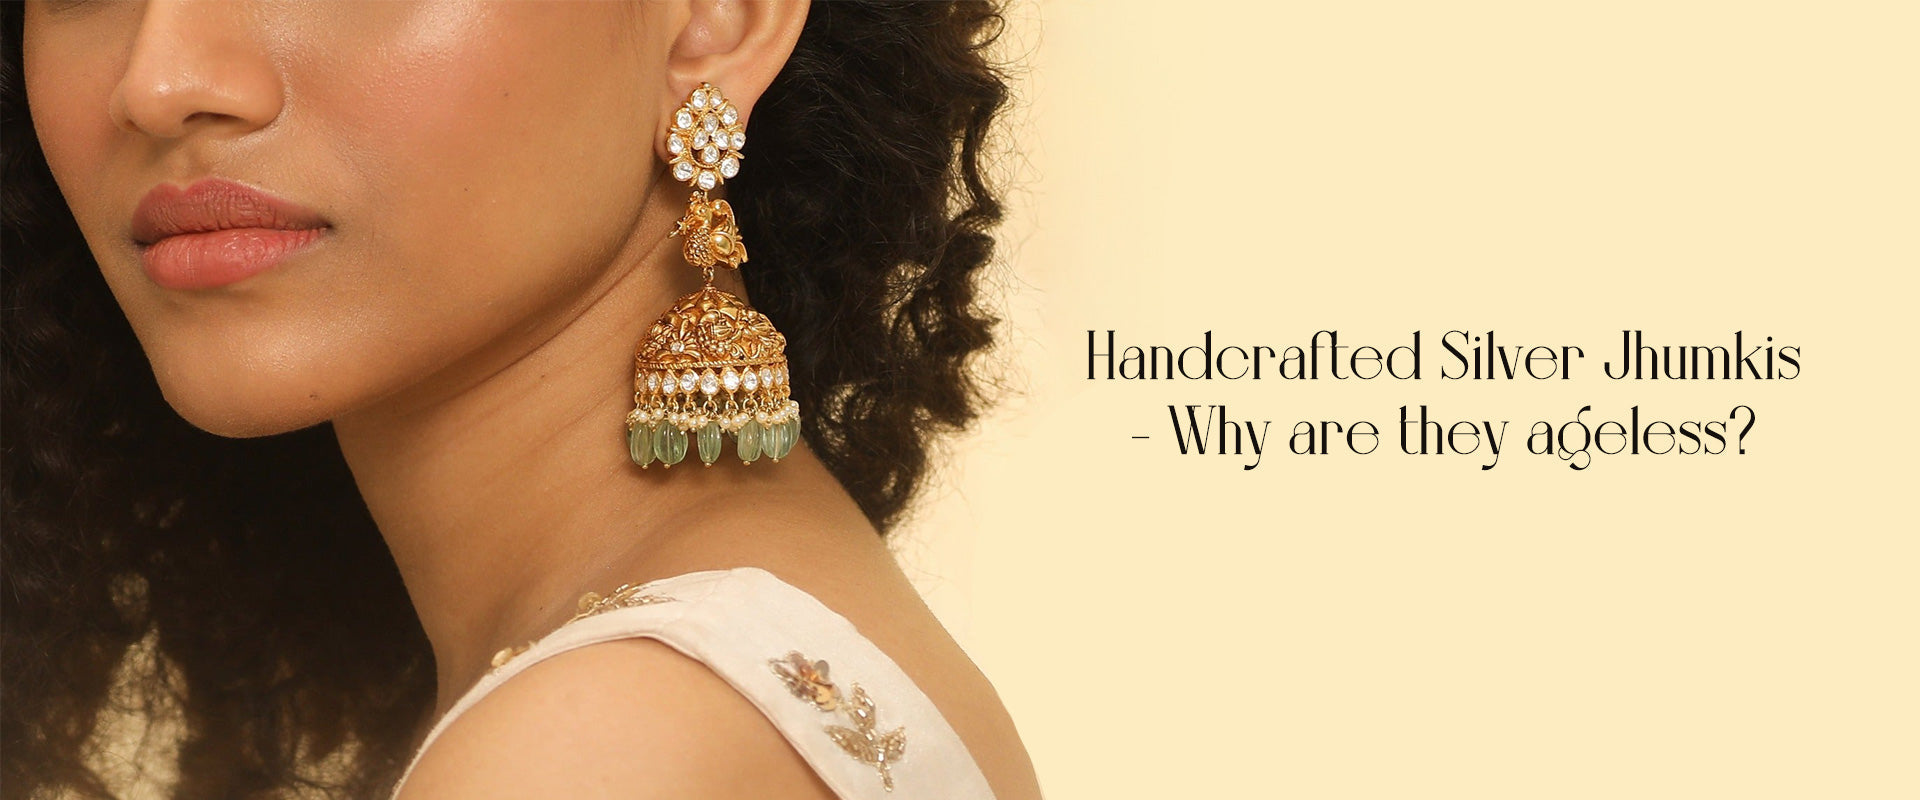 Handcrafted Silver Jhumkas - Why are they Ageless?